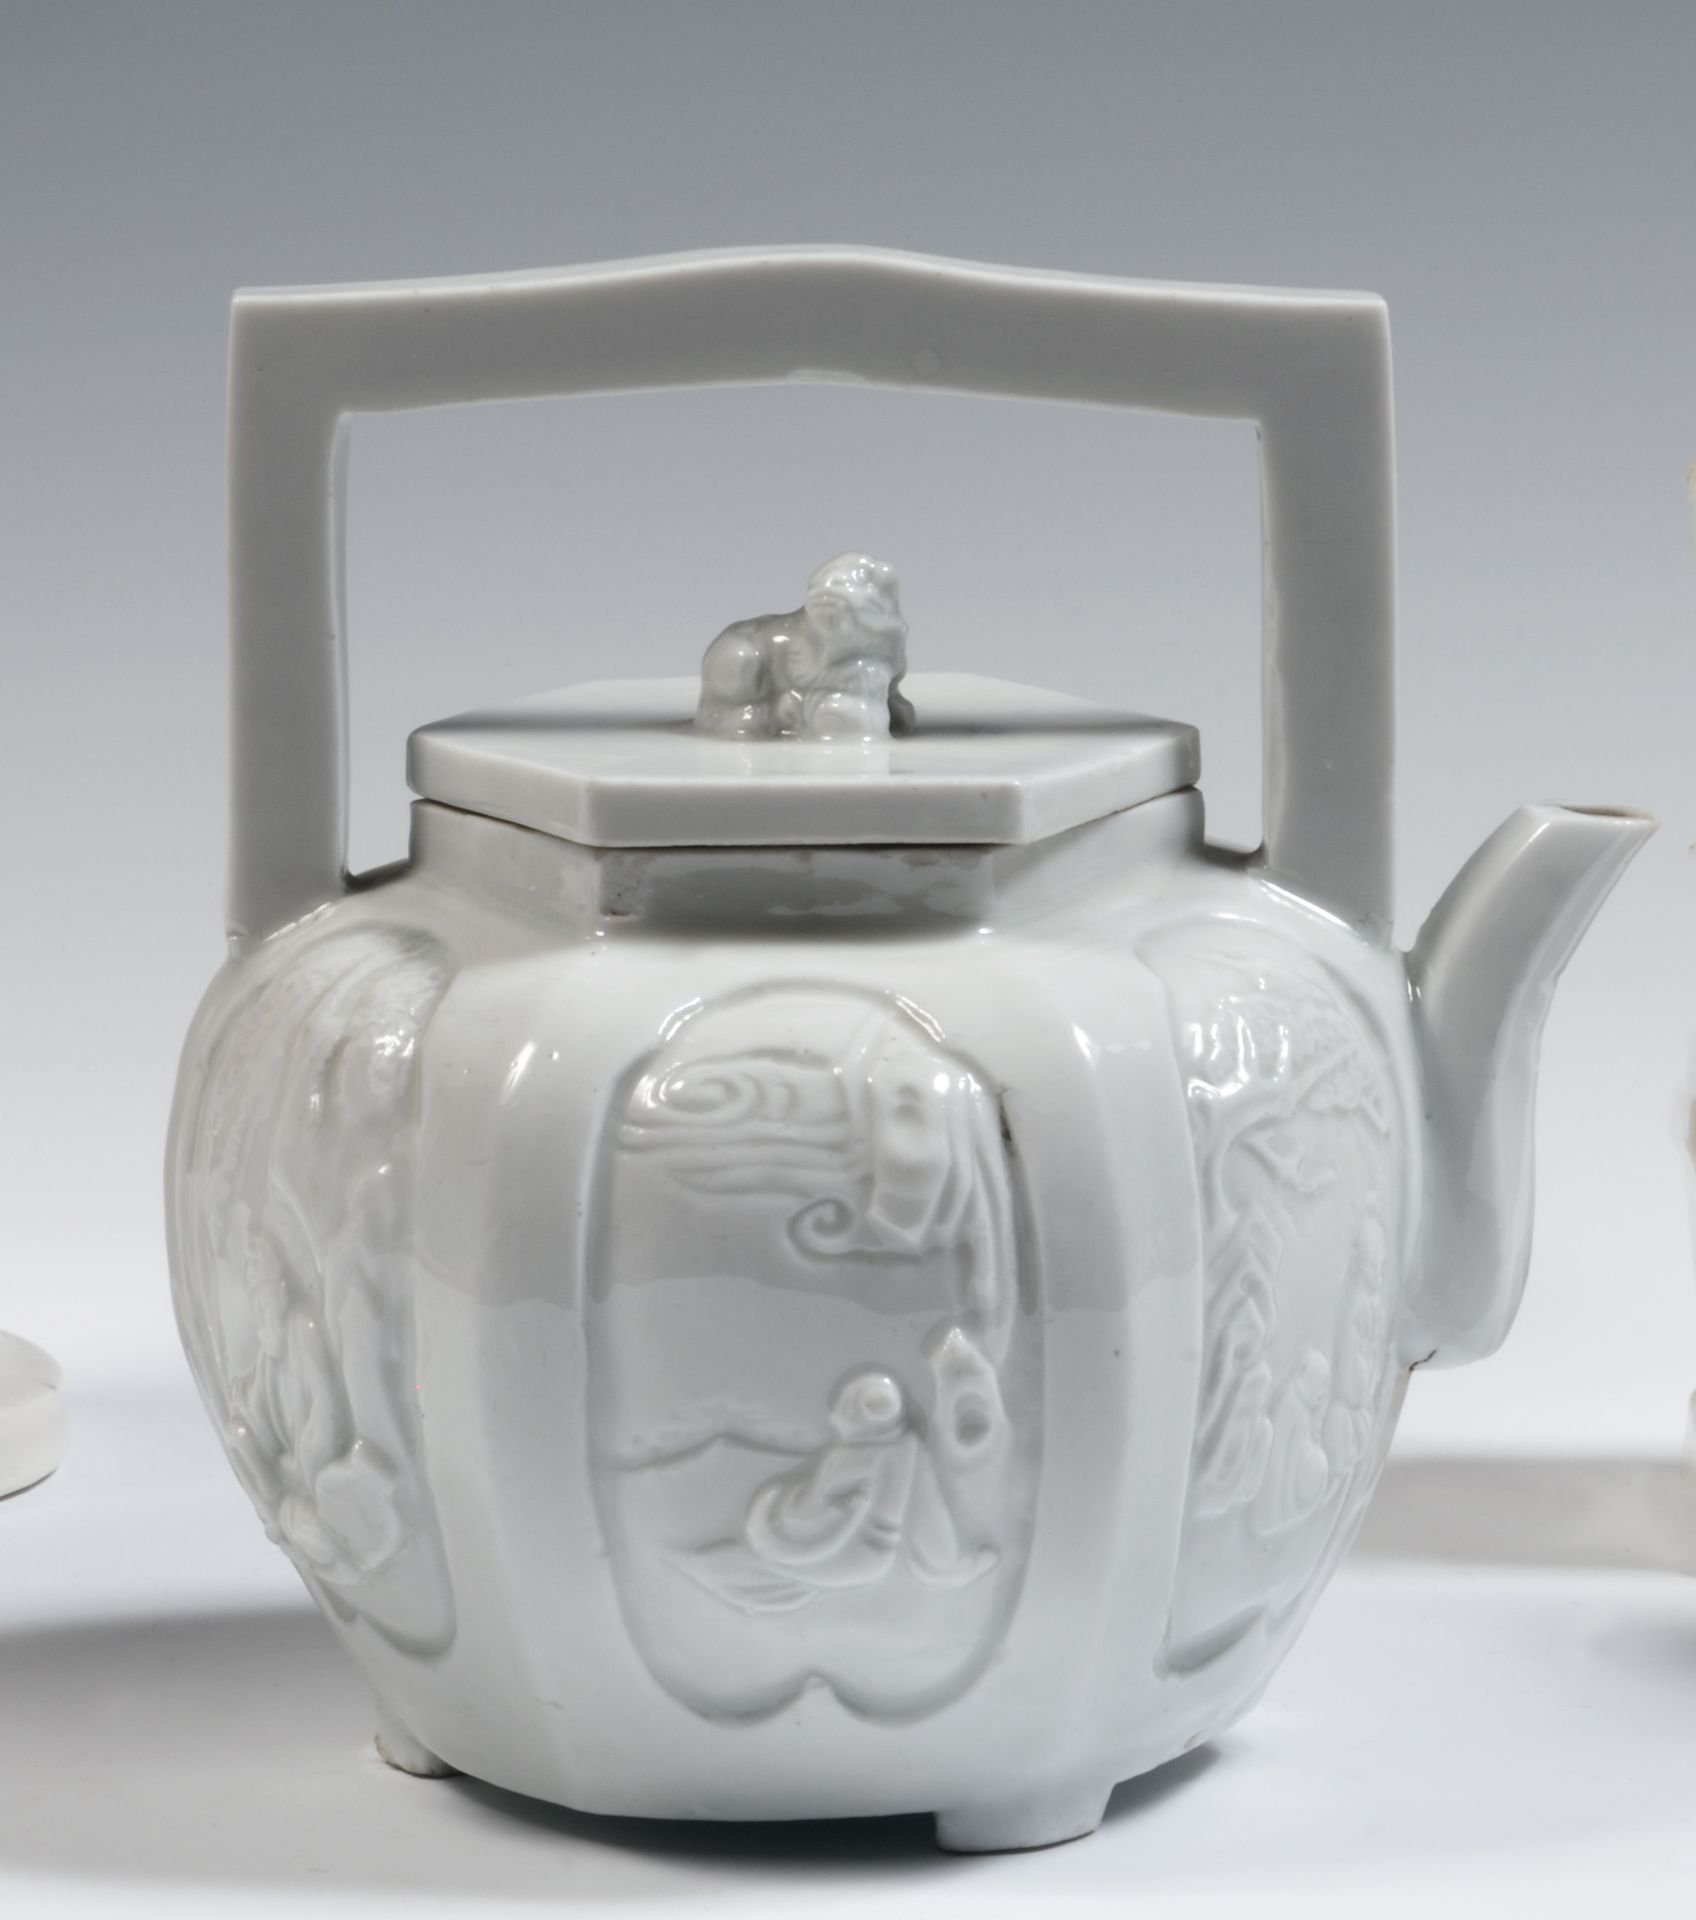 Null 
China

Large covered teapot in white porcelain of hexagonal form with reli&hellip;